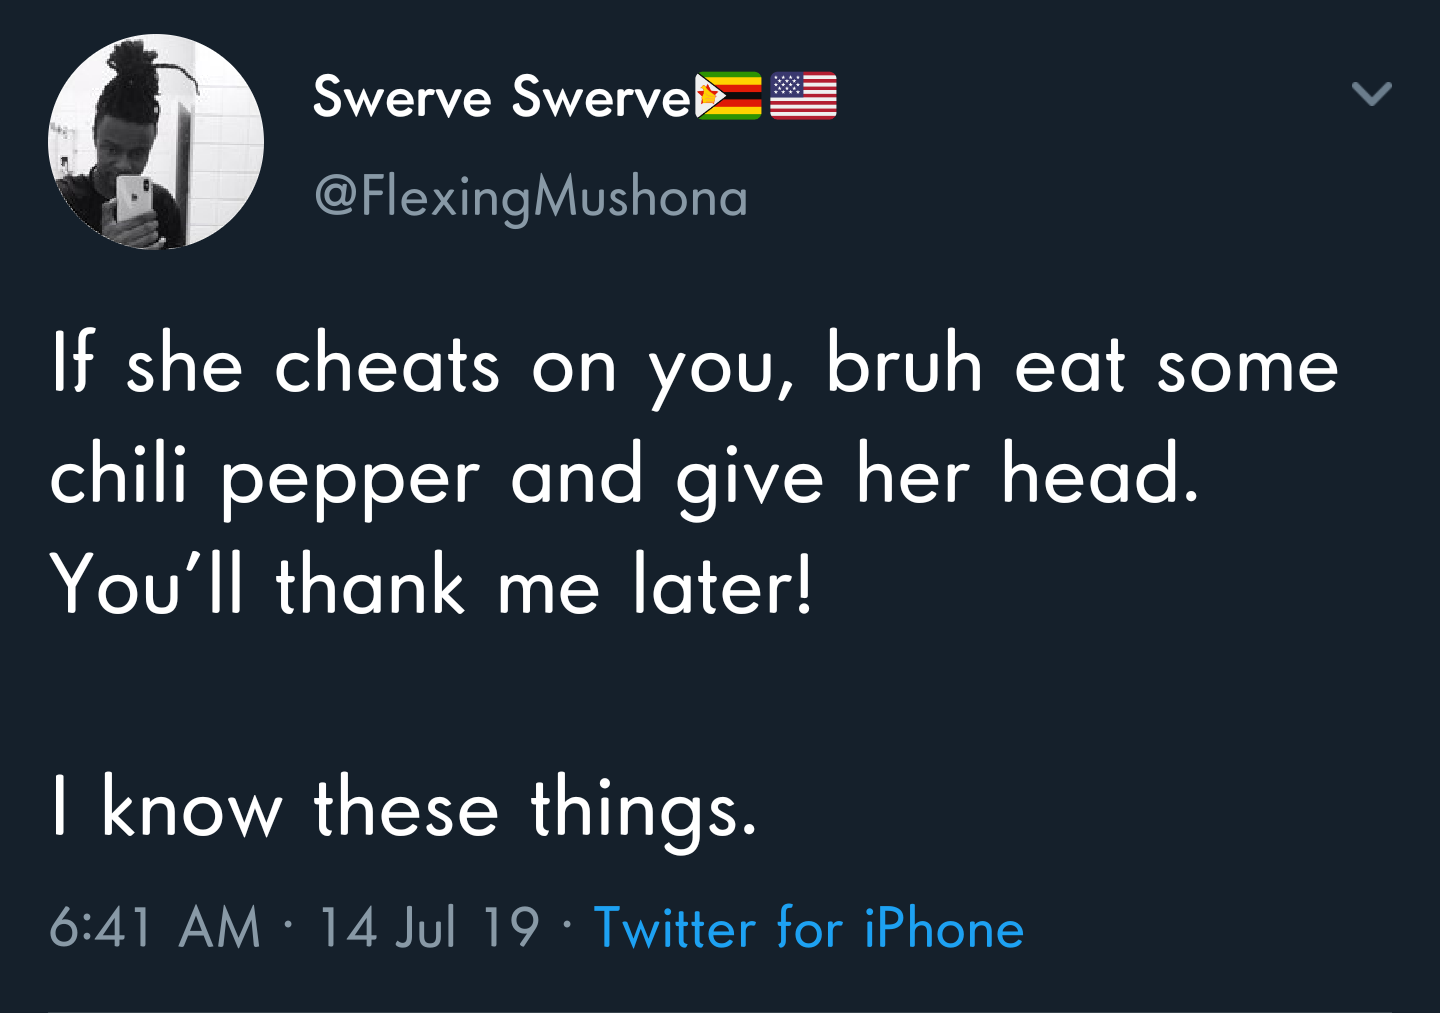 angle - Swerve Swerves If she cheats on you, bruh eat some chili pepper and give her head. You'll thank me later! I know these things. 14 Jul 19 Twitter for iPhone